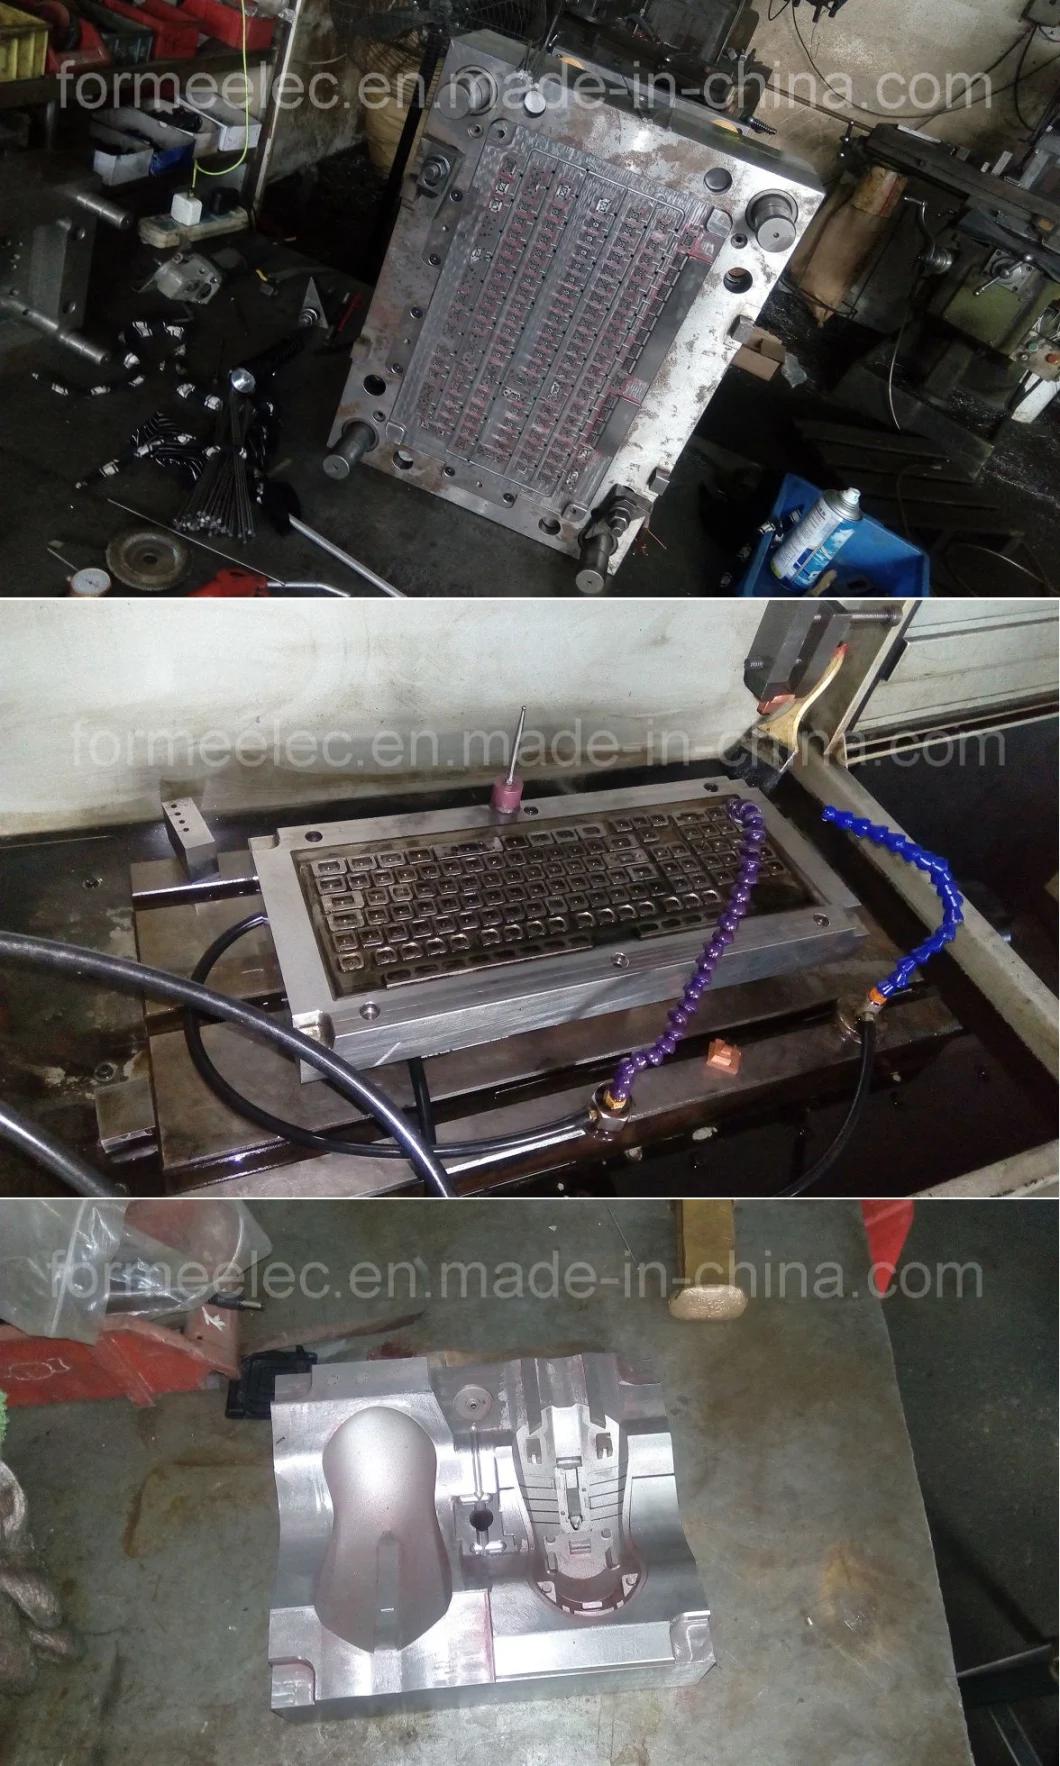 Keyboard Mould Design Phototype Manufacture Plastic Injection Mold Keyboard Tooling